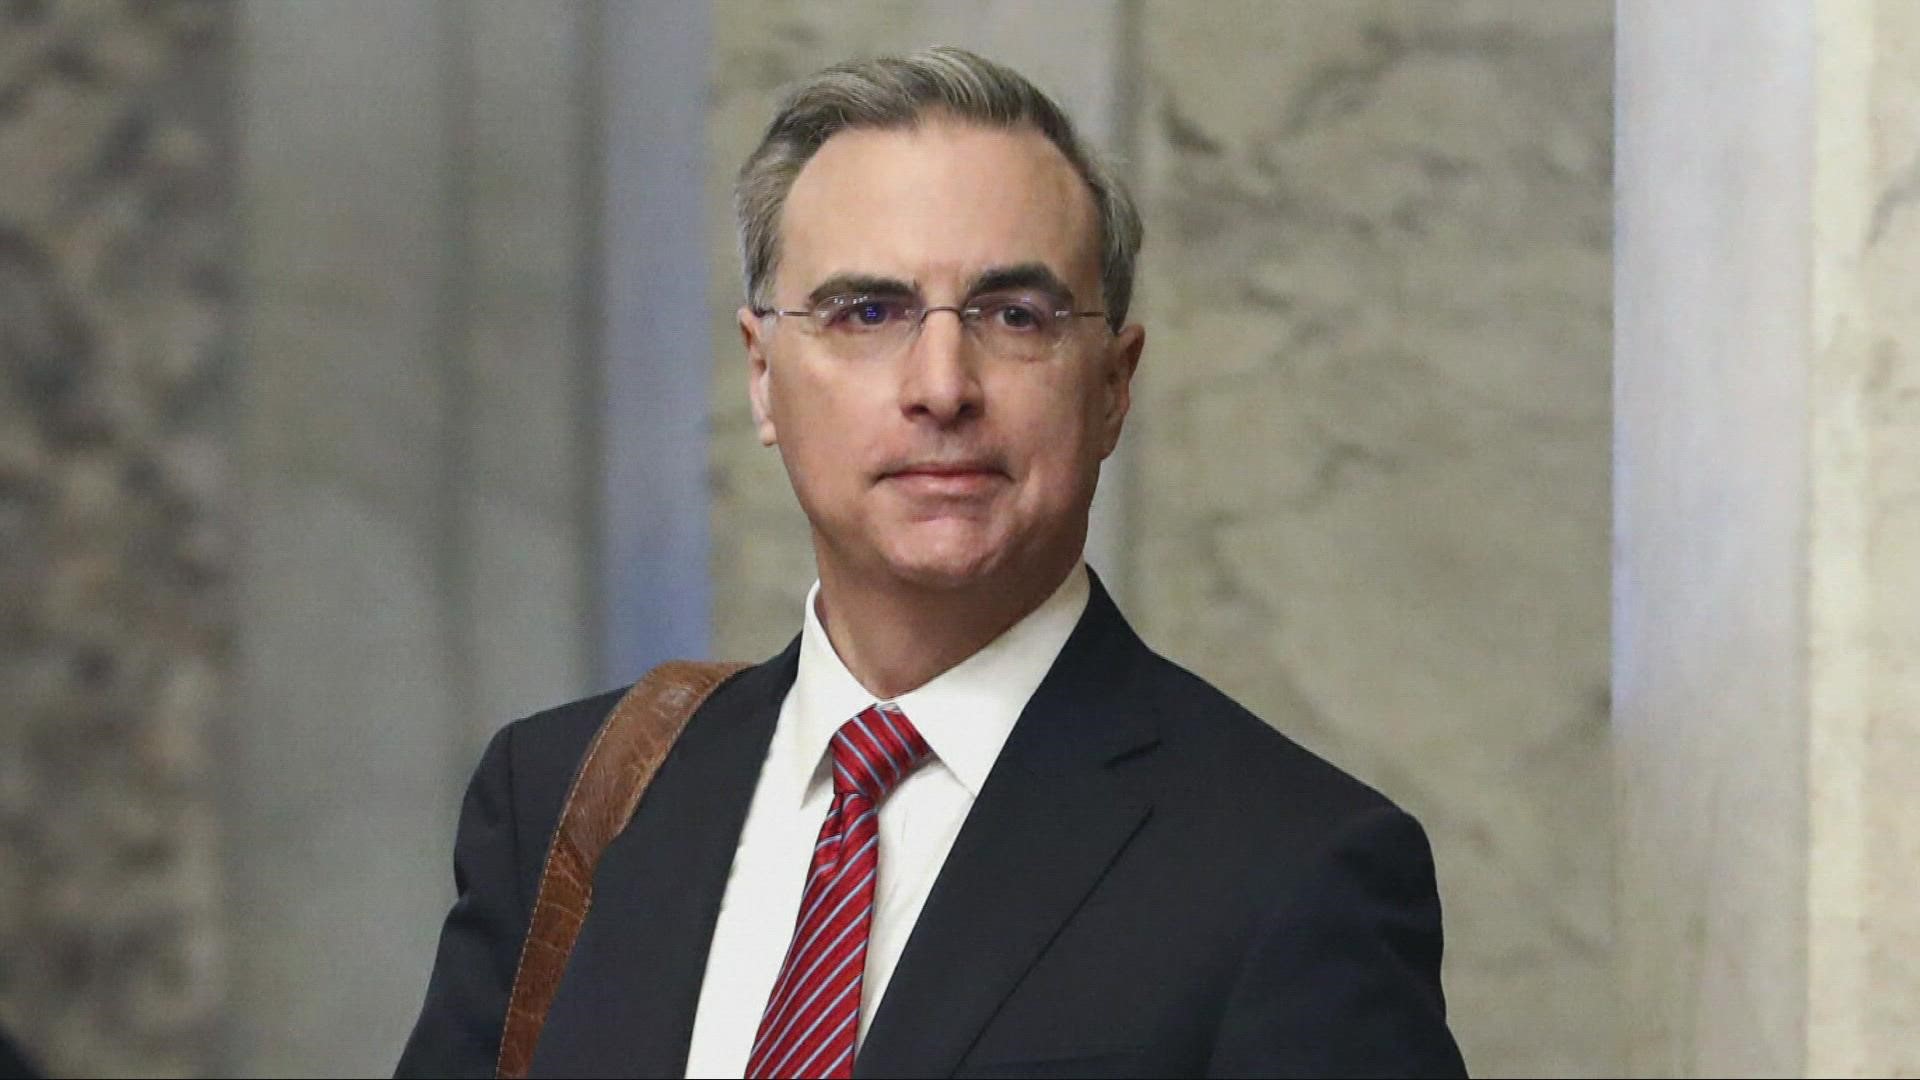 The House committee investigating the Jan. 6 insurrection has issued a subpoena to former White House counsel Pat Cipollone.